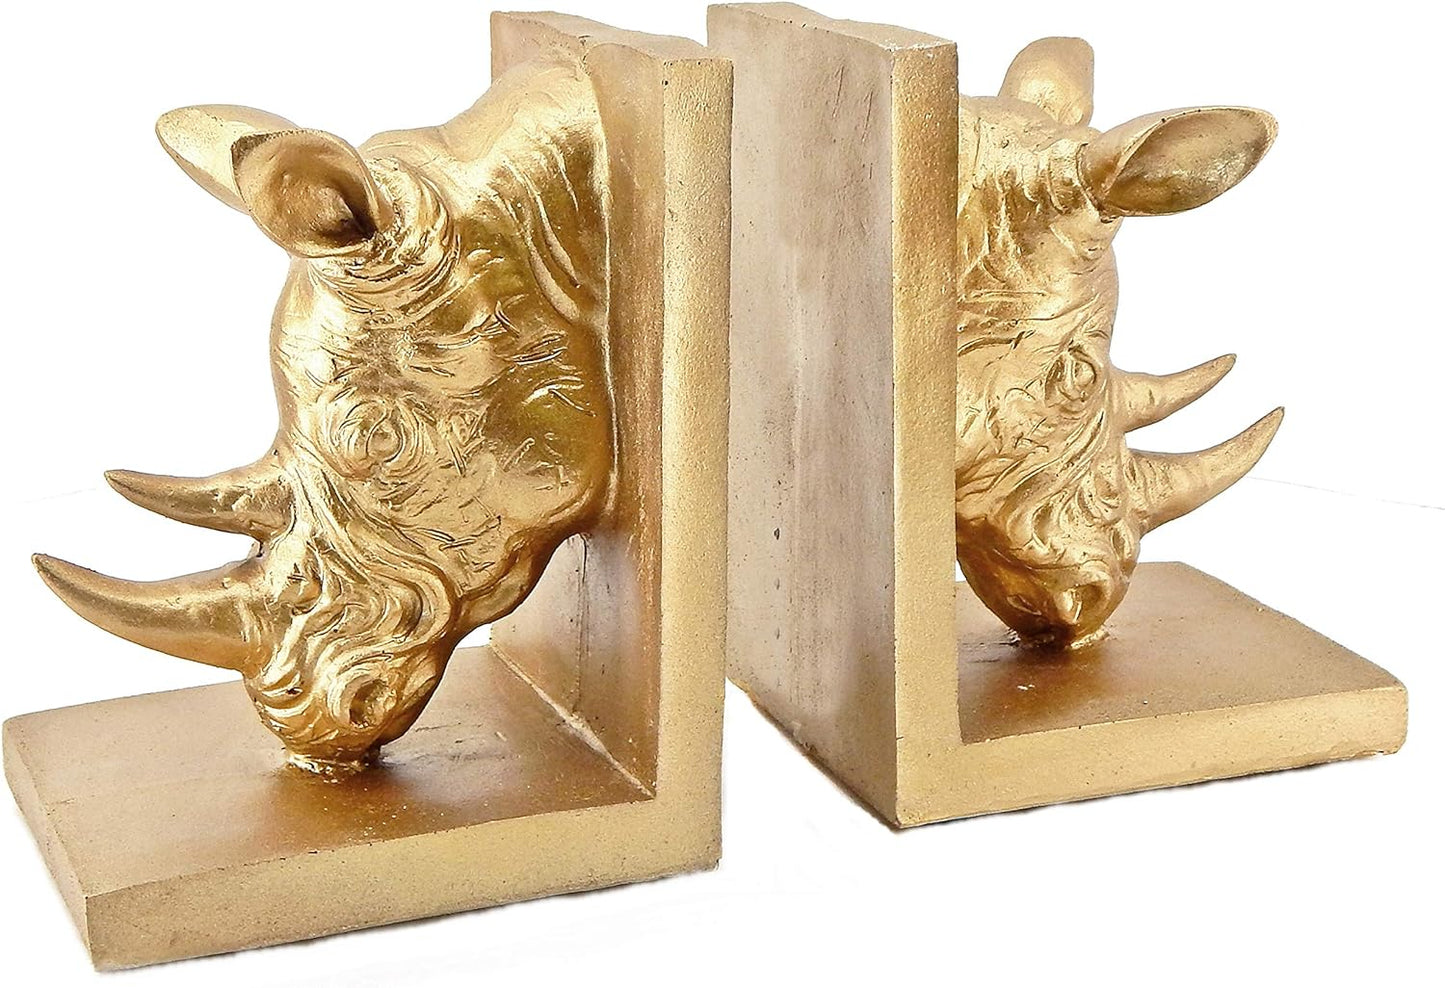 Rino Decorative Bookend the Cool Rinocer Vintage Style Rhino Golden Statues Bookshelves Home Decor 7 Inch Retro Book Ends Industrial Rustic